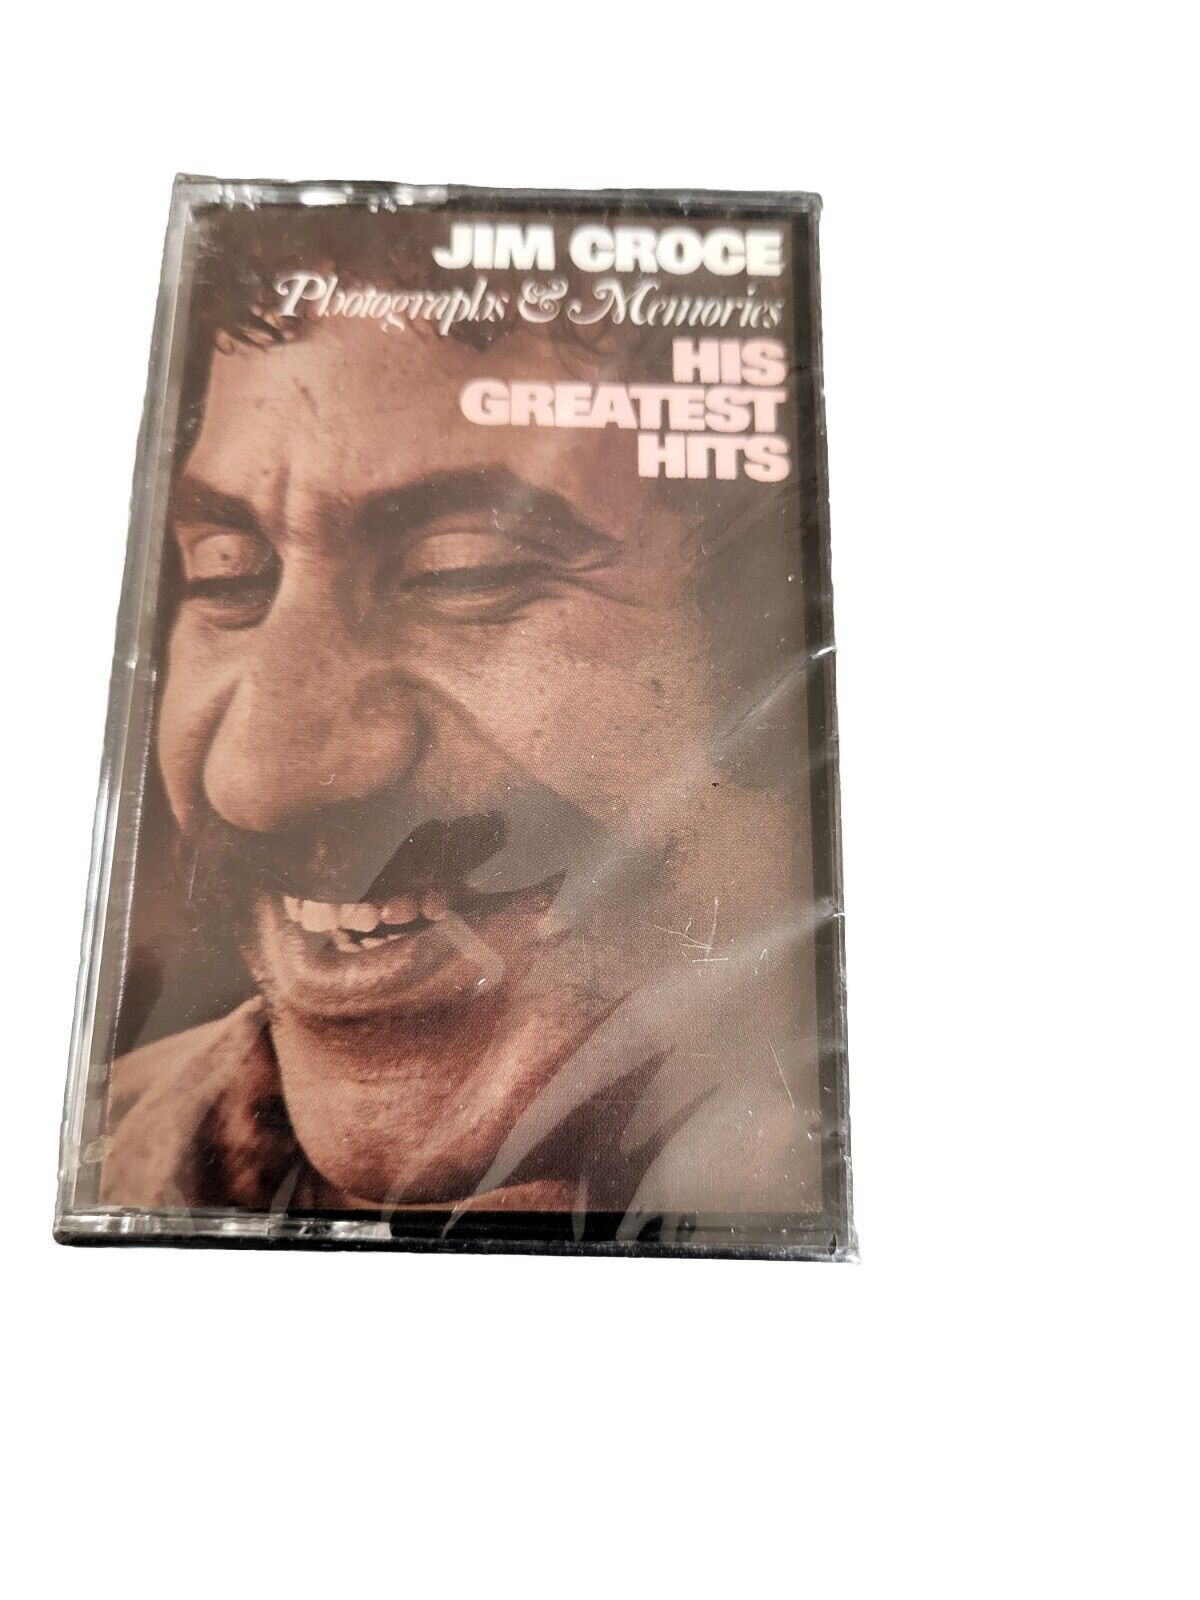 Vintage 1970’s JIM CROCE Photographs And Memories His Greatest Hits